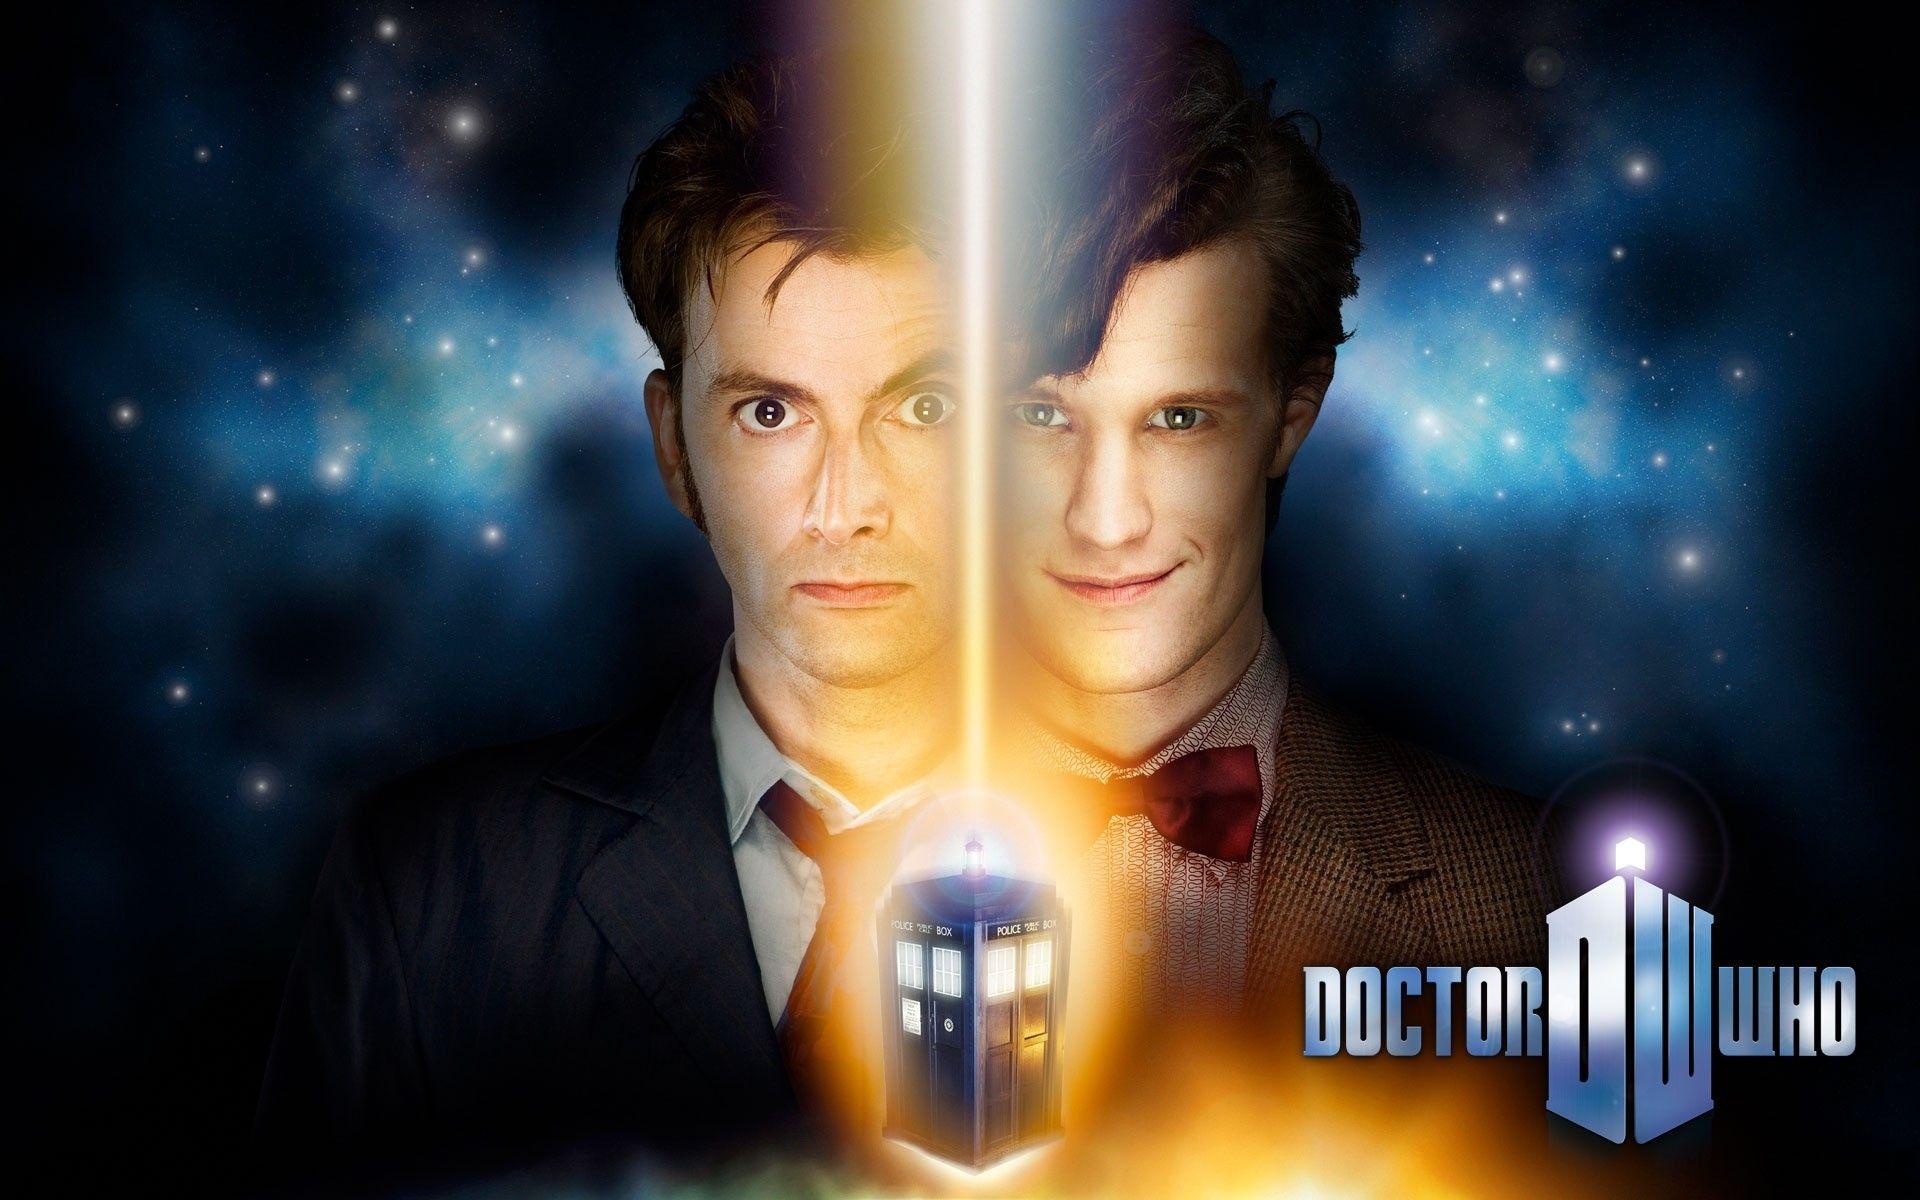 Doctor Who. Android wallpaper for free